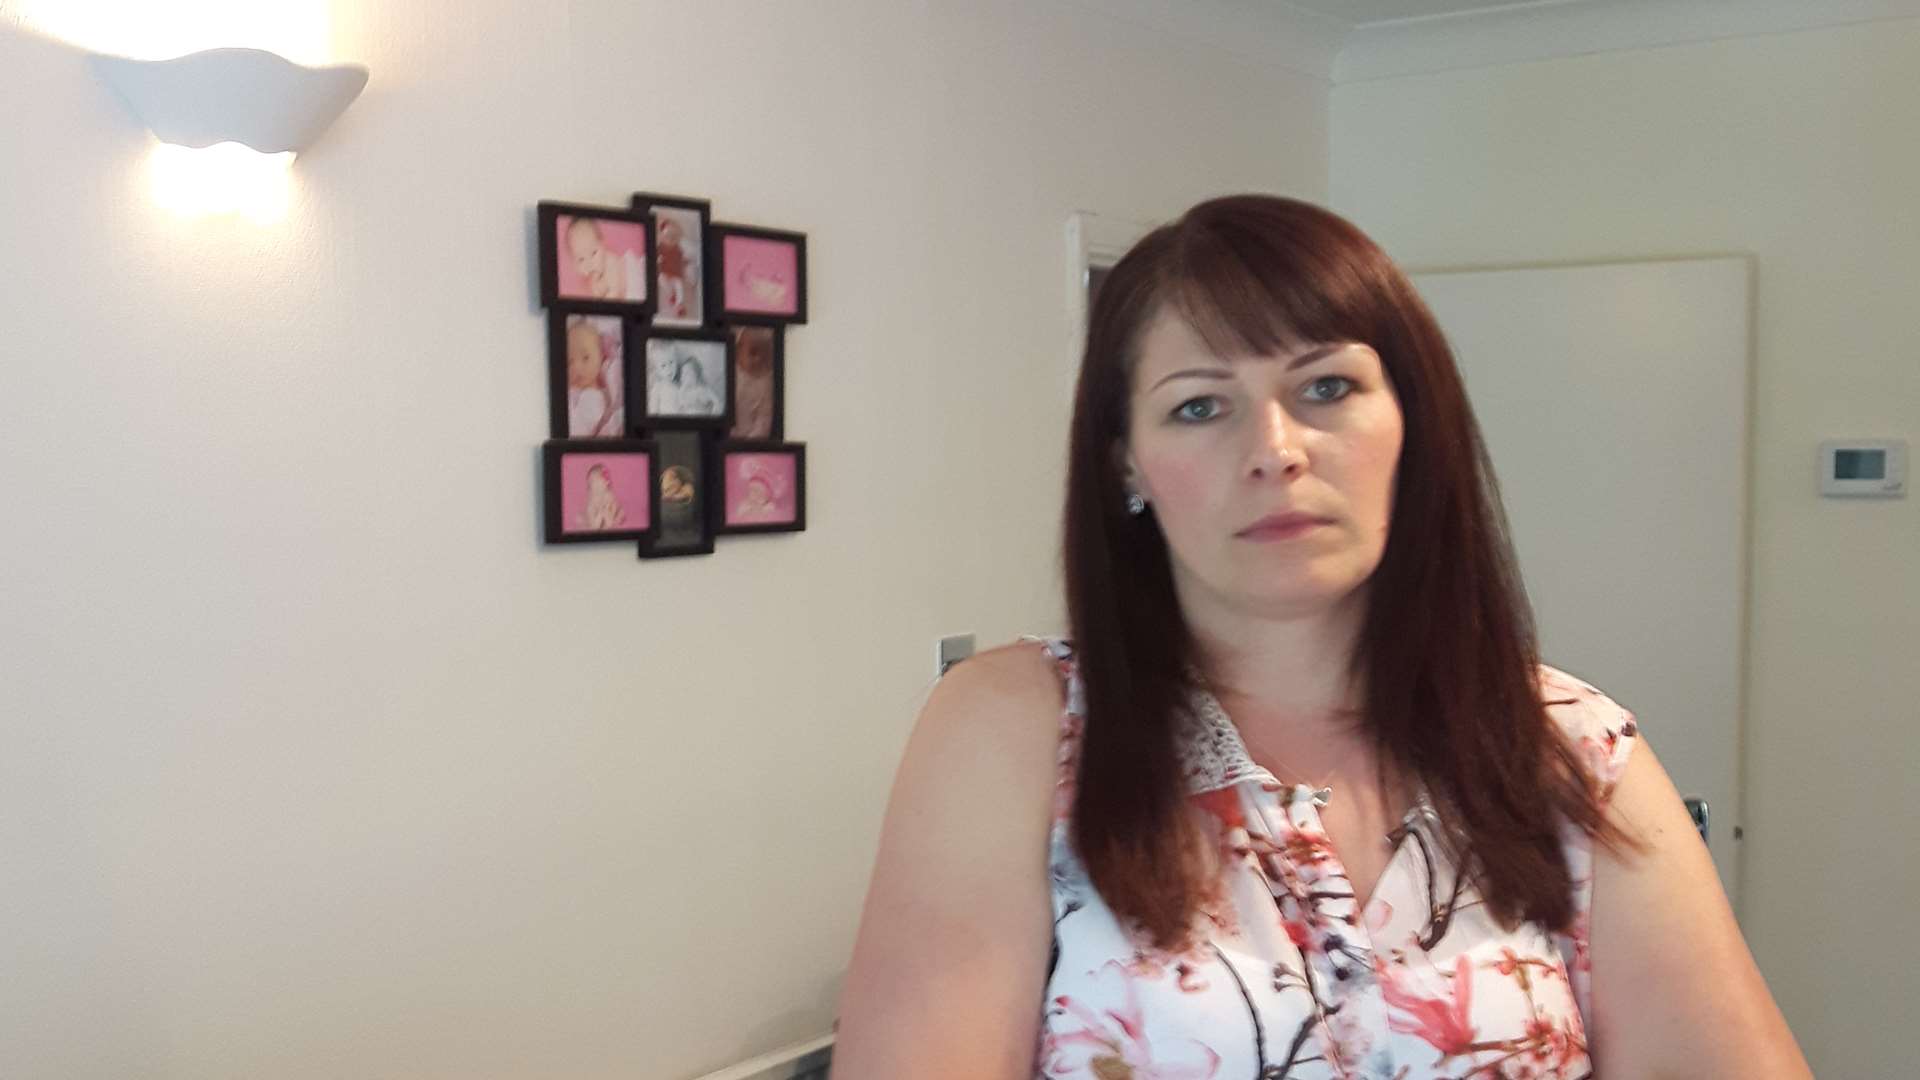 Emma Randle, who has had her childcare agreement with Kidsunlimited terminated